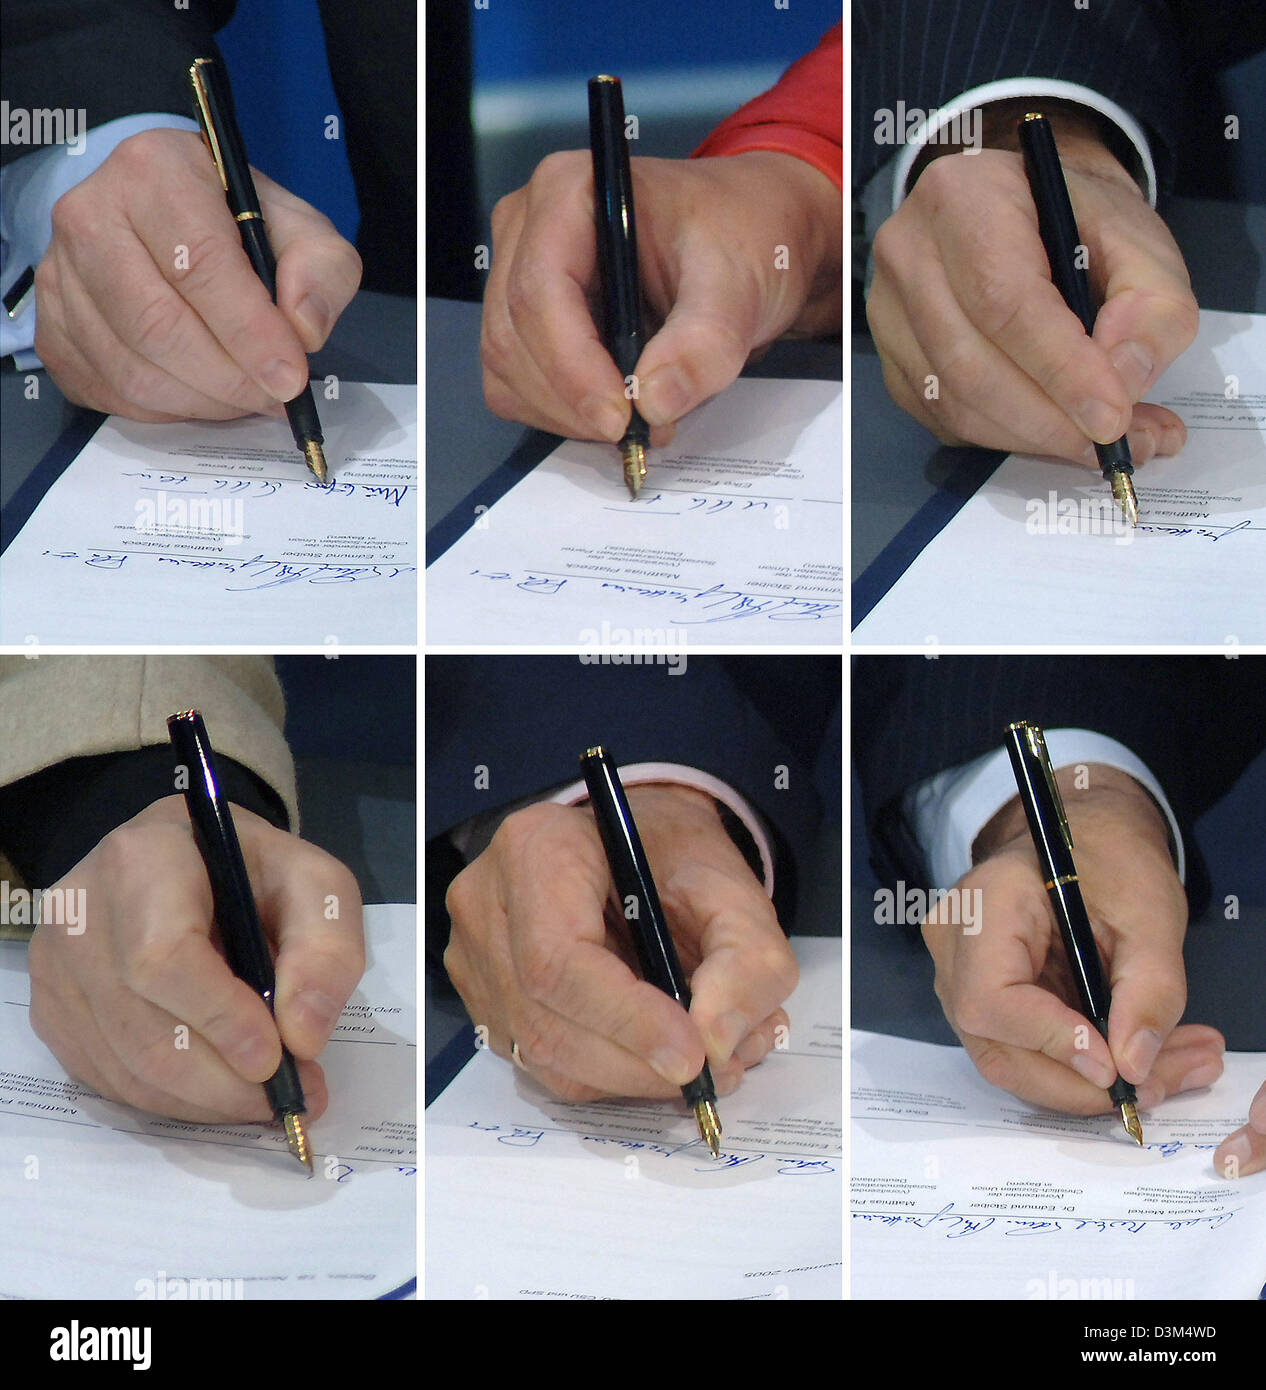 (dpa) - The composite picture shows the hands of (top, L-R) SPD's Franz Muentefering, Elke Ferner and Matthias Platzek and (bottom, L-R) of CDU's Angela Merkel, Edmund Stoiber and Michael Glos signing the  coalition agreement  for a grand government coalition between the conservative Christian Democrats (CDU) and Social Democrats (SPD) in Berlin, Friday 18 November 2005. Merkel is  Stock Photo